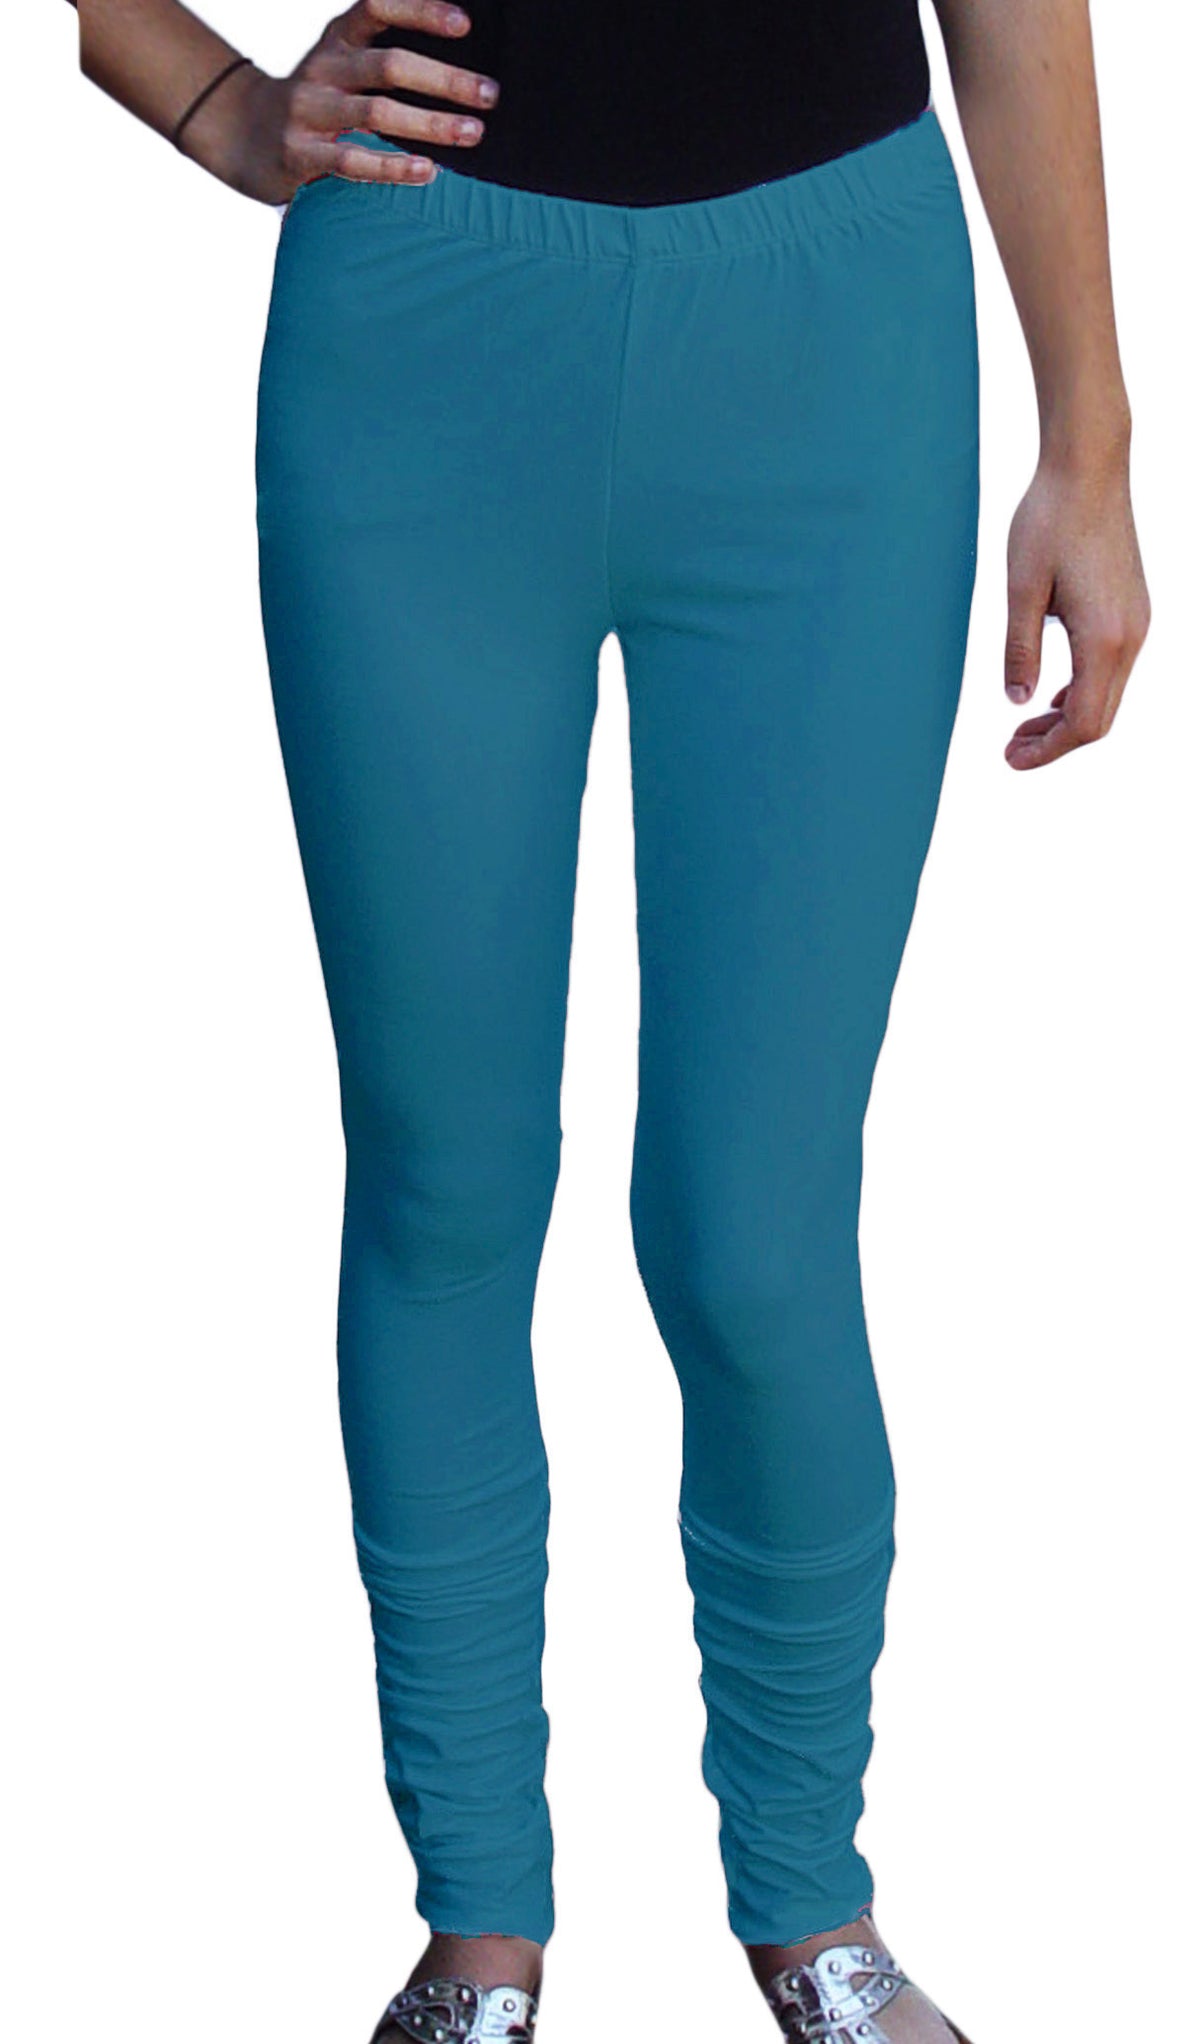 Women's Cotton Extra Long Leggings (Additional Colors)